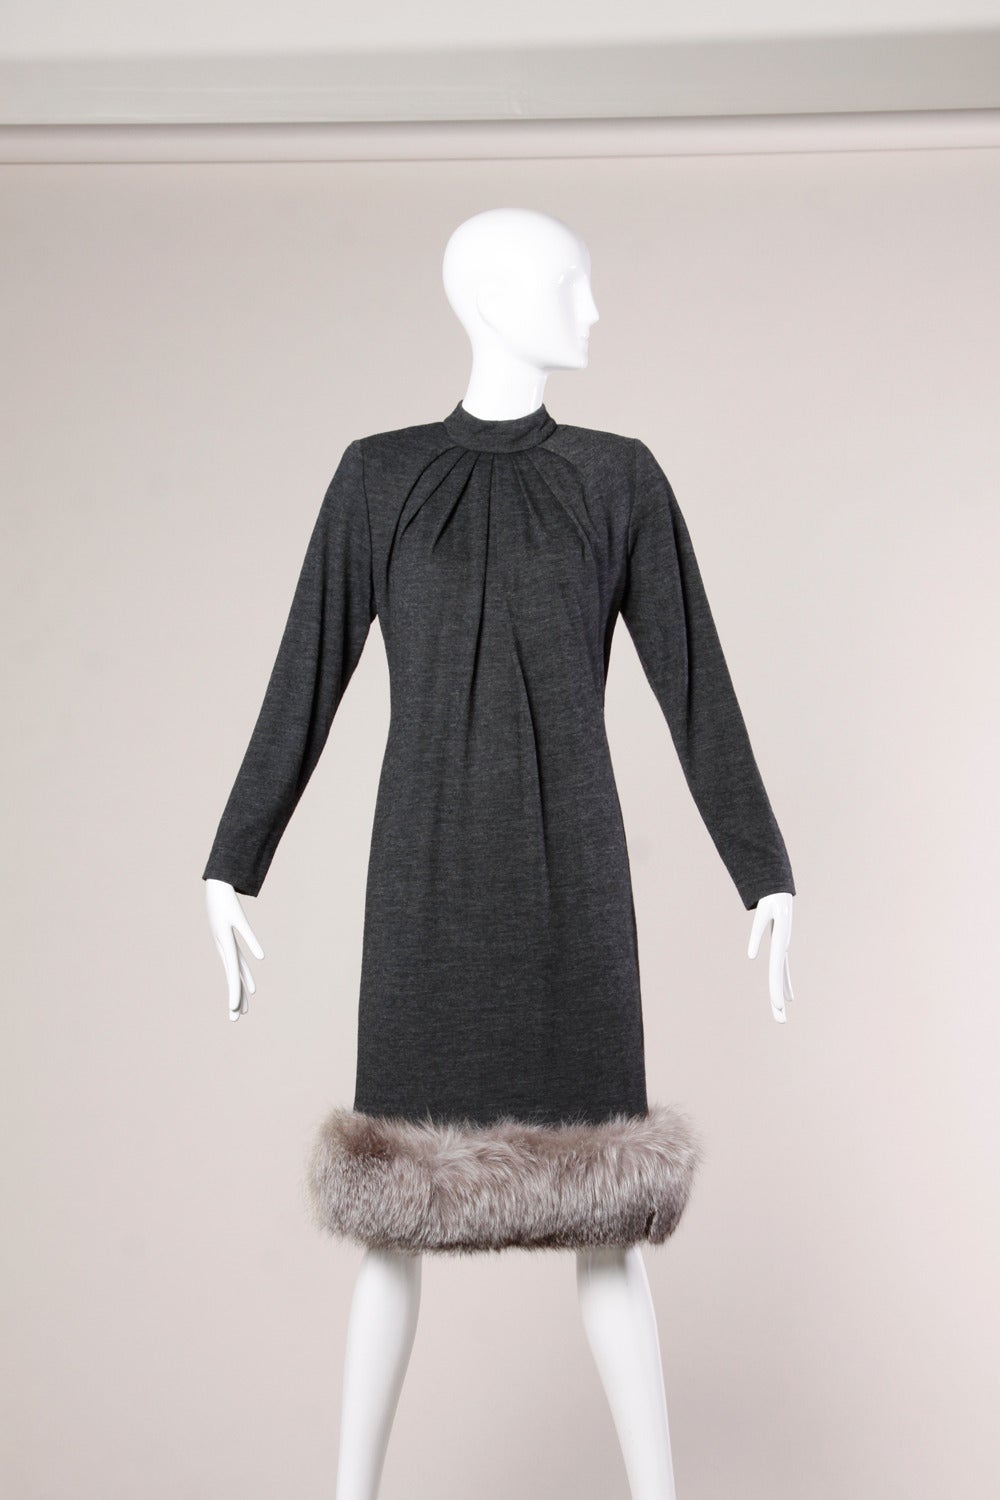 Women's Victor Costa for Saks Fifth Avenue Vintage Wool Dress with Fox Fur Trim